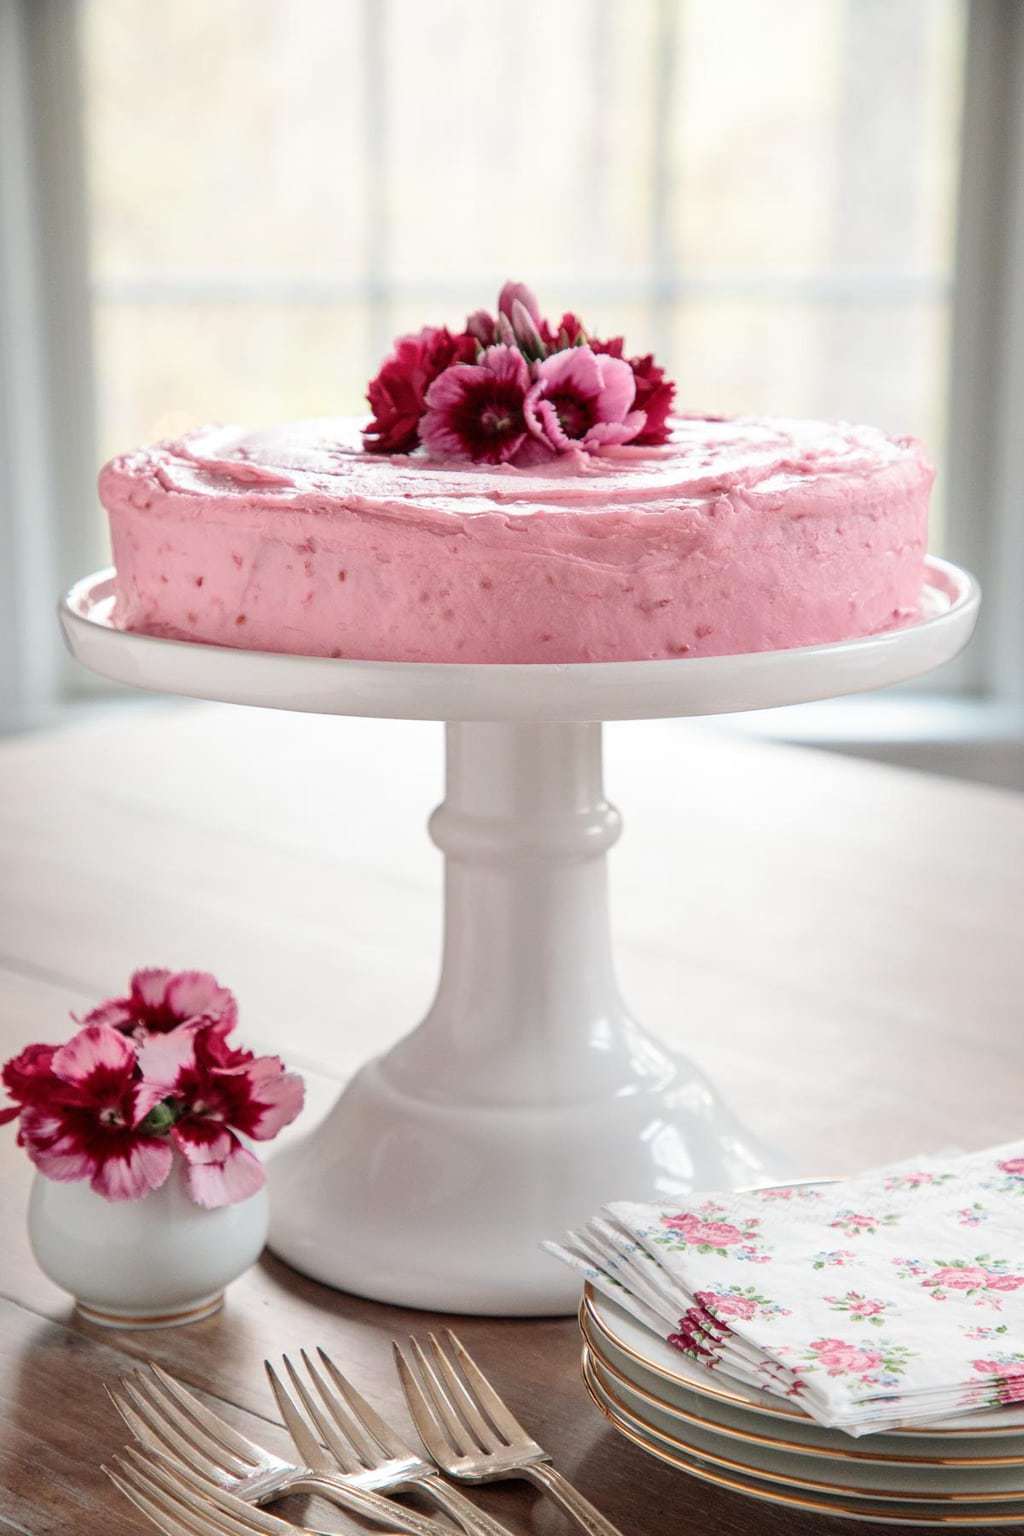 Vertical photo of a One-Bowl Buttermilk Cake with Fresh Raspberry Buttercream on a white pedestal cake stand with serving utensils and plates in the foreground and a window in the background.